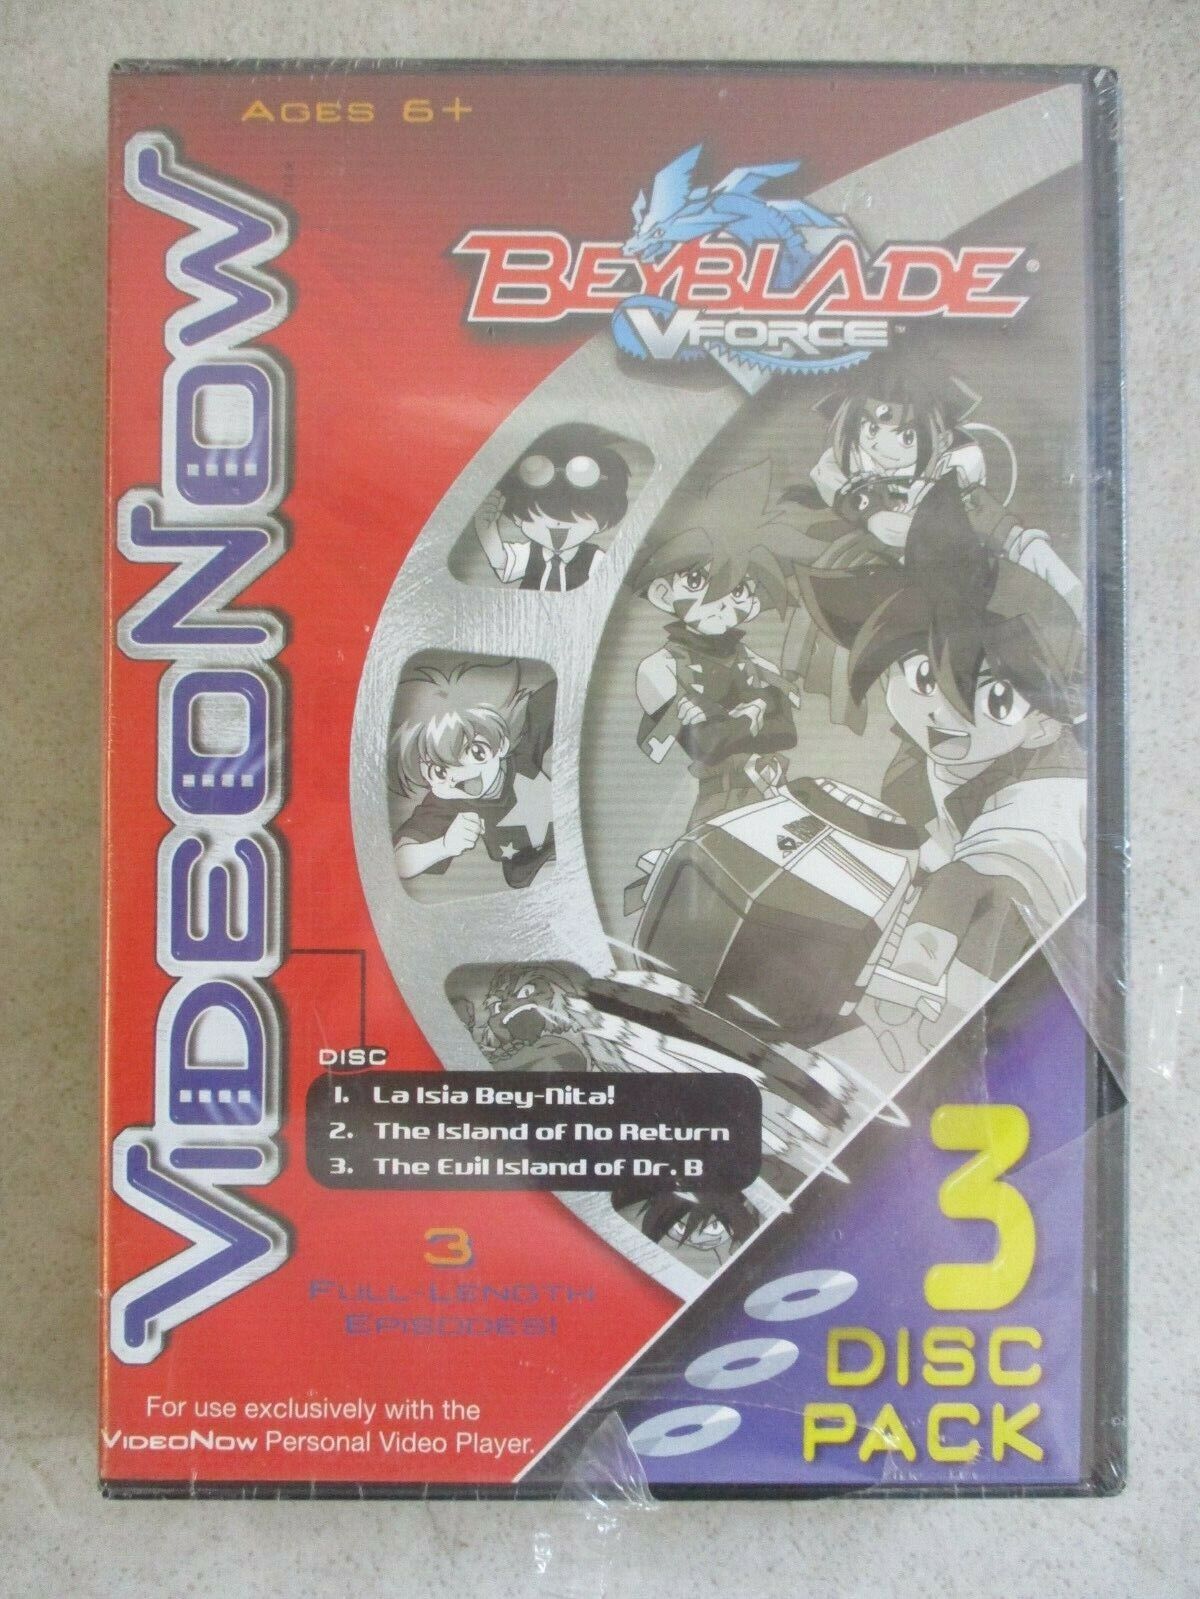 SEALED MIB VIDEO NOW BEYBLADE VFORCE 2003 35% OFF 3 PACK famous RELEASE DISC